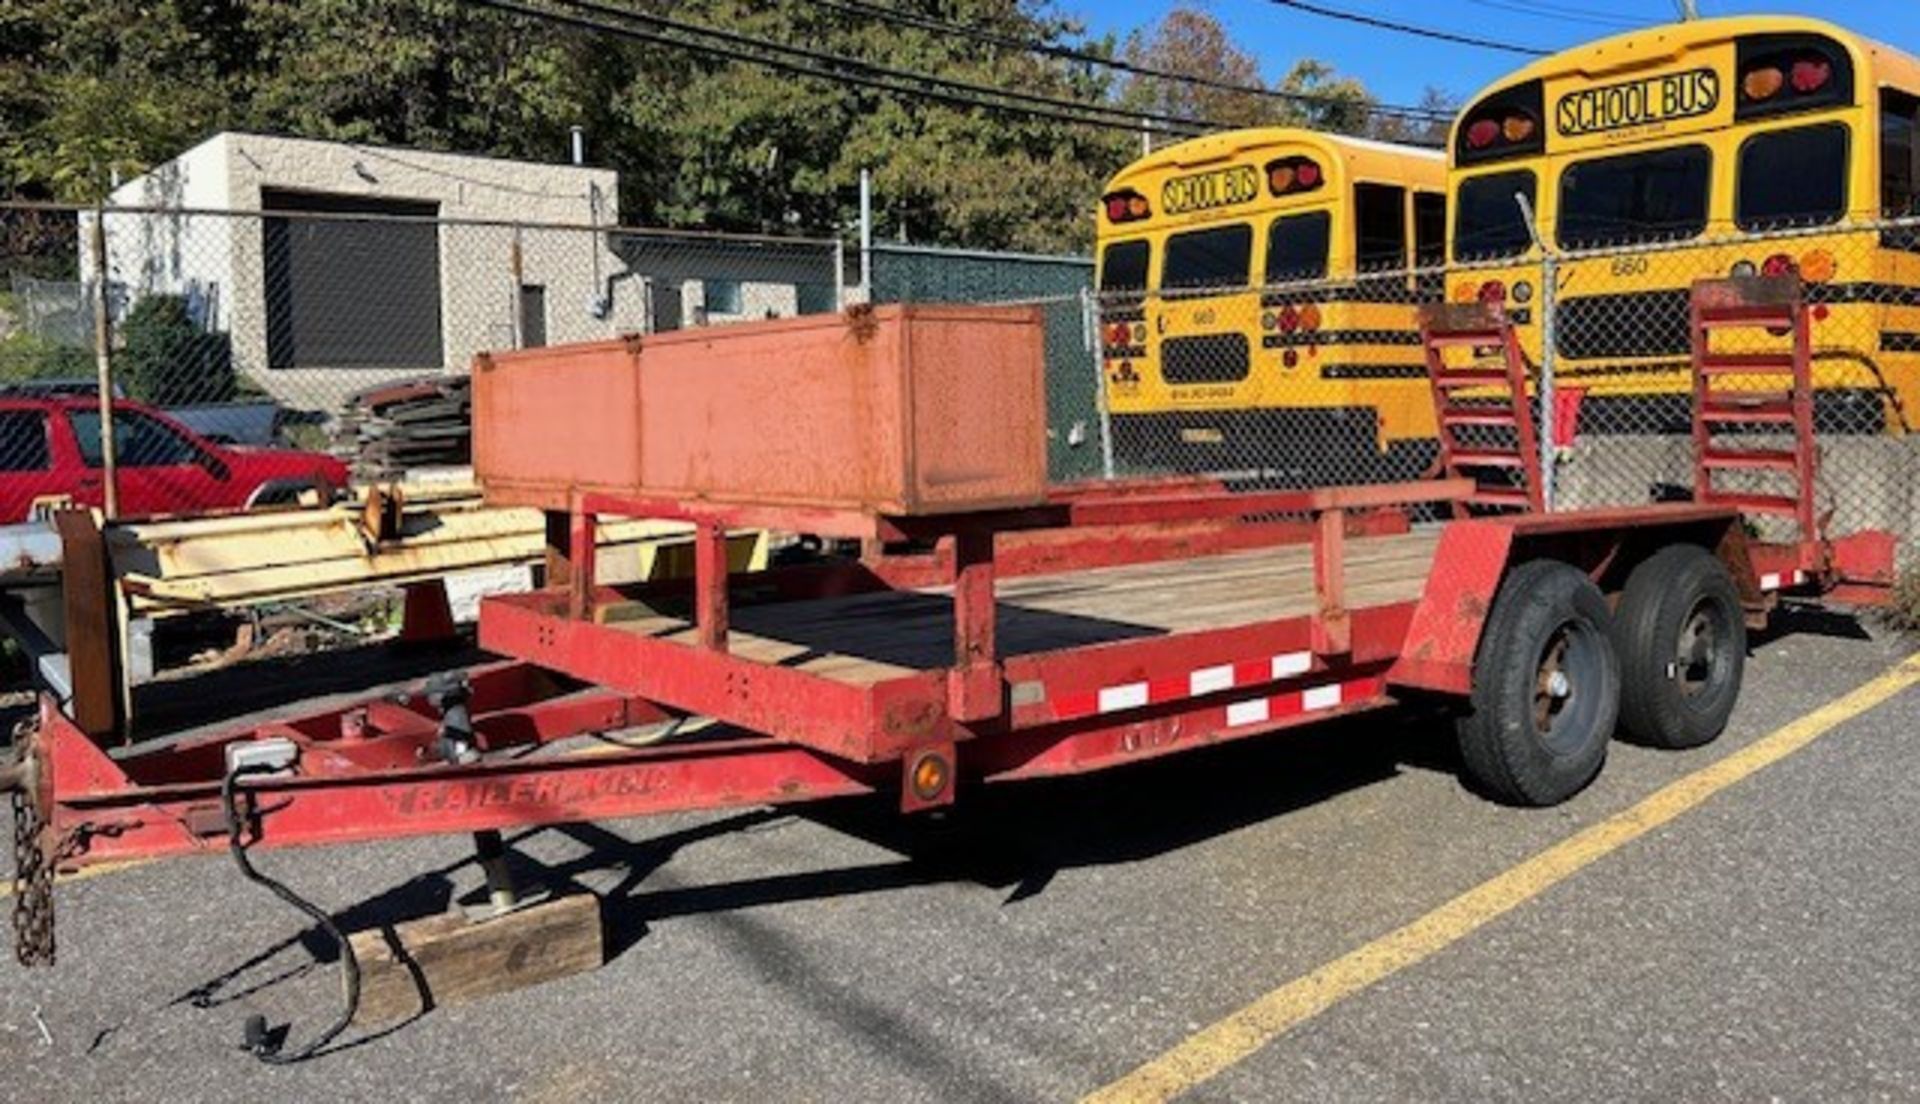 2001 Trailer King Dual Axle Trailer with Ramps, 6-1/2' x 16', M: 5HD16, 10,000 Lb. Capacity - Image 6 of 6